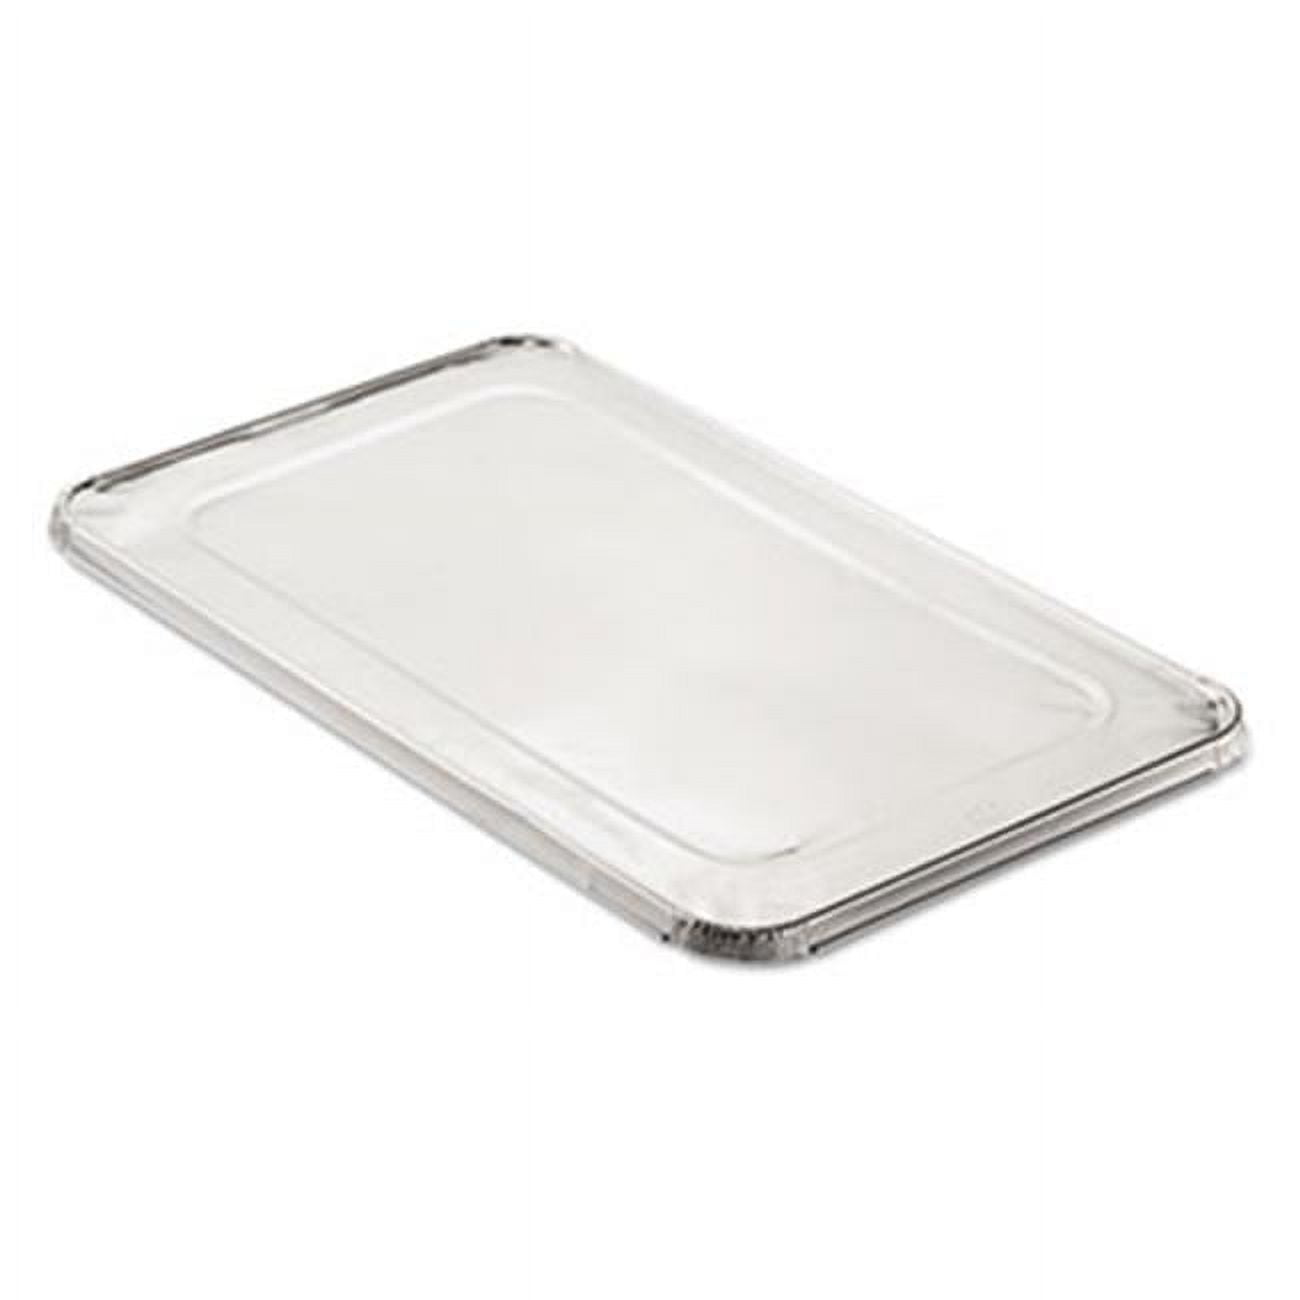 Picture of HFA 2050-00-50 Lid Full Steamtable, Case Of 50